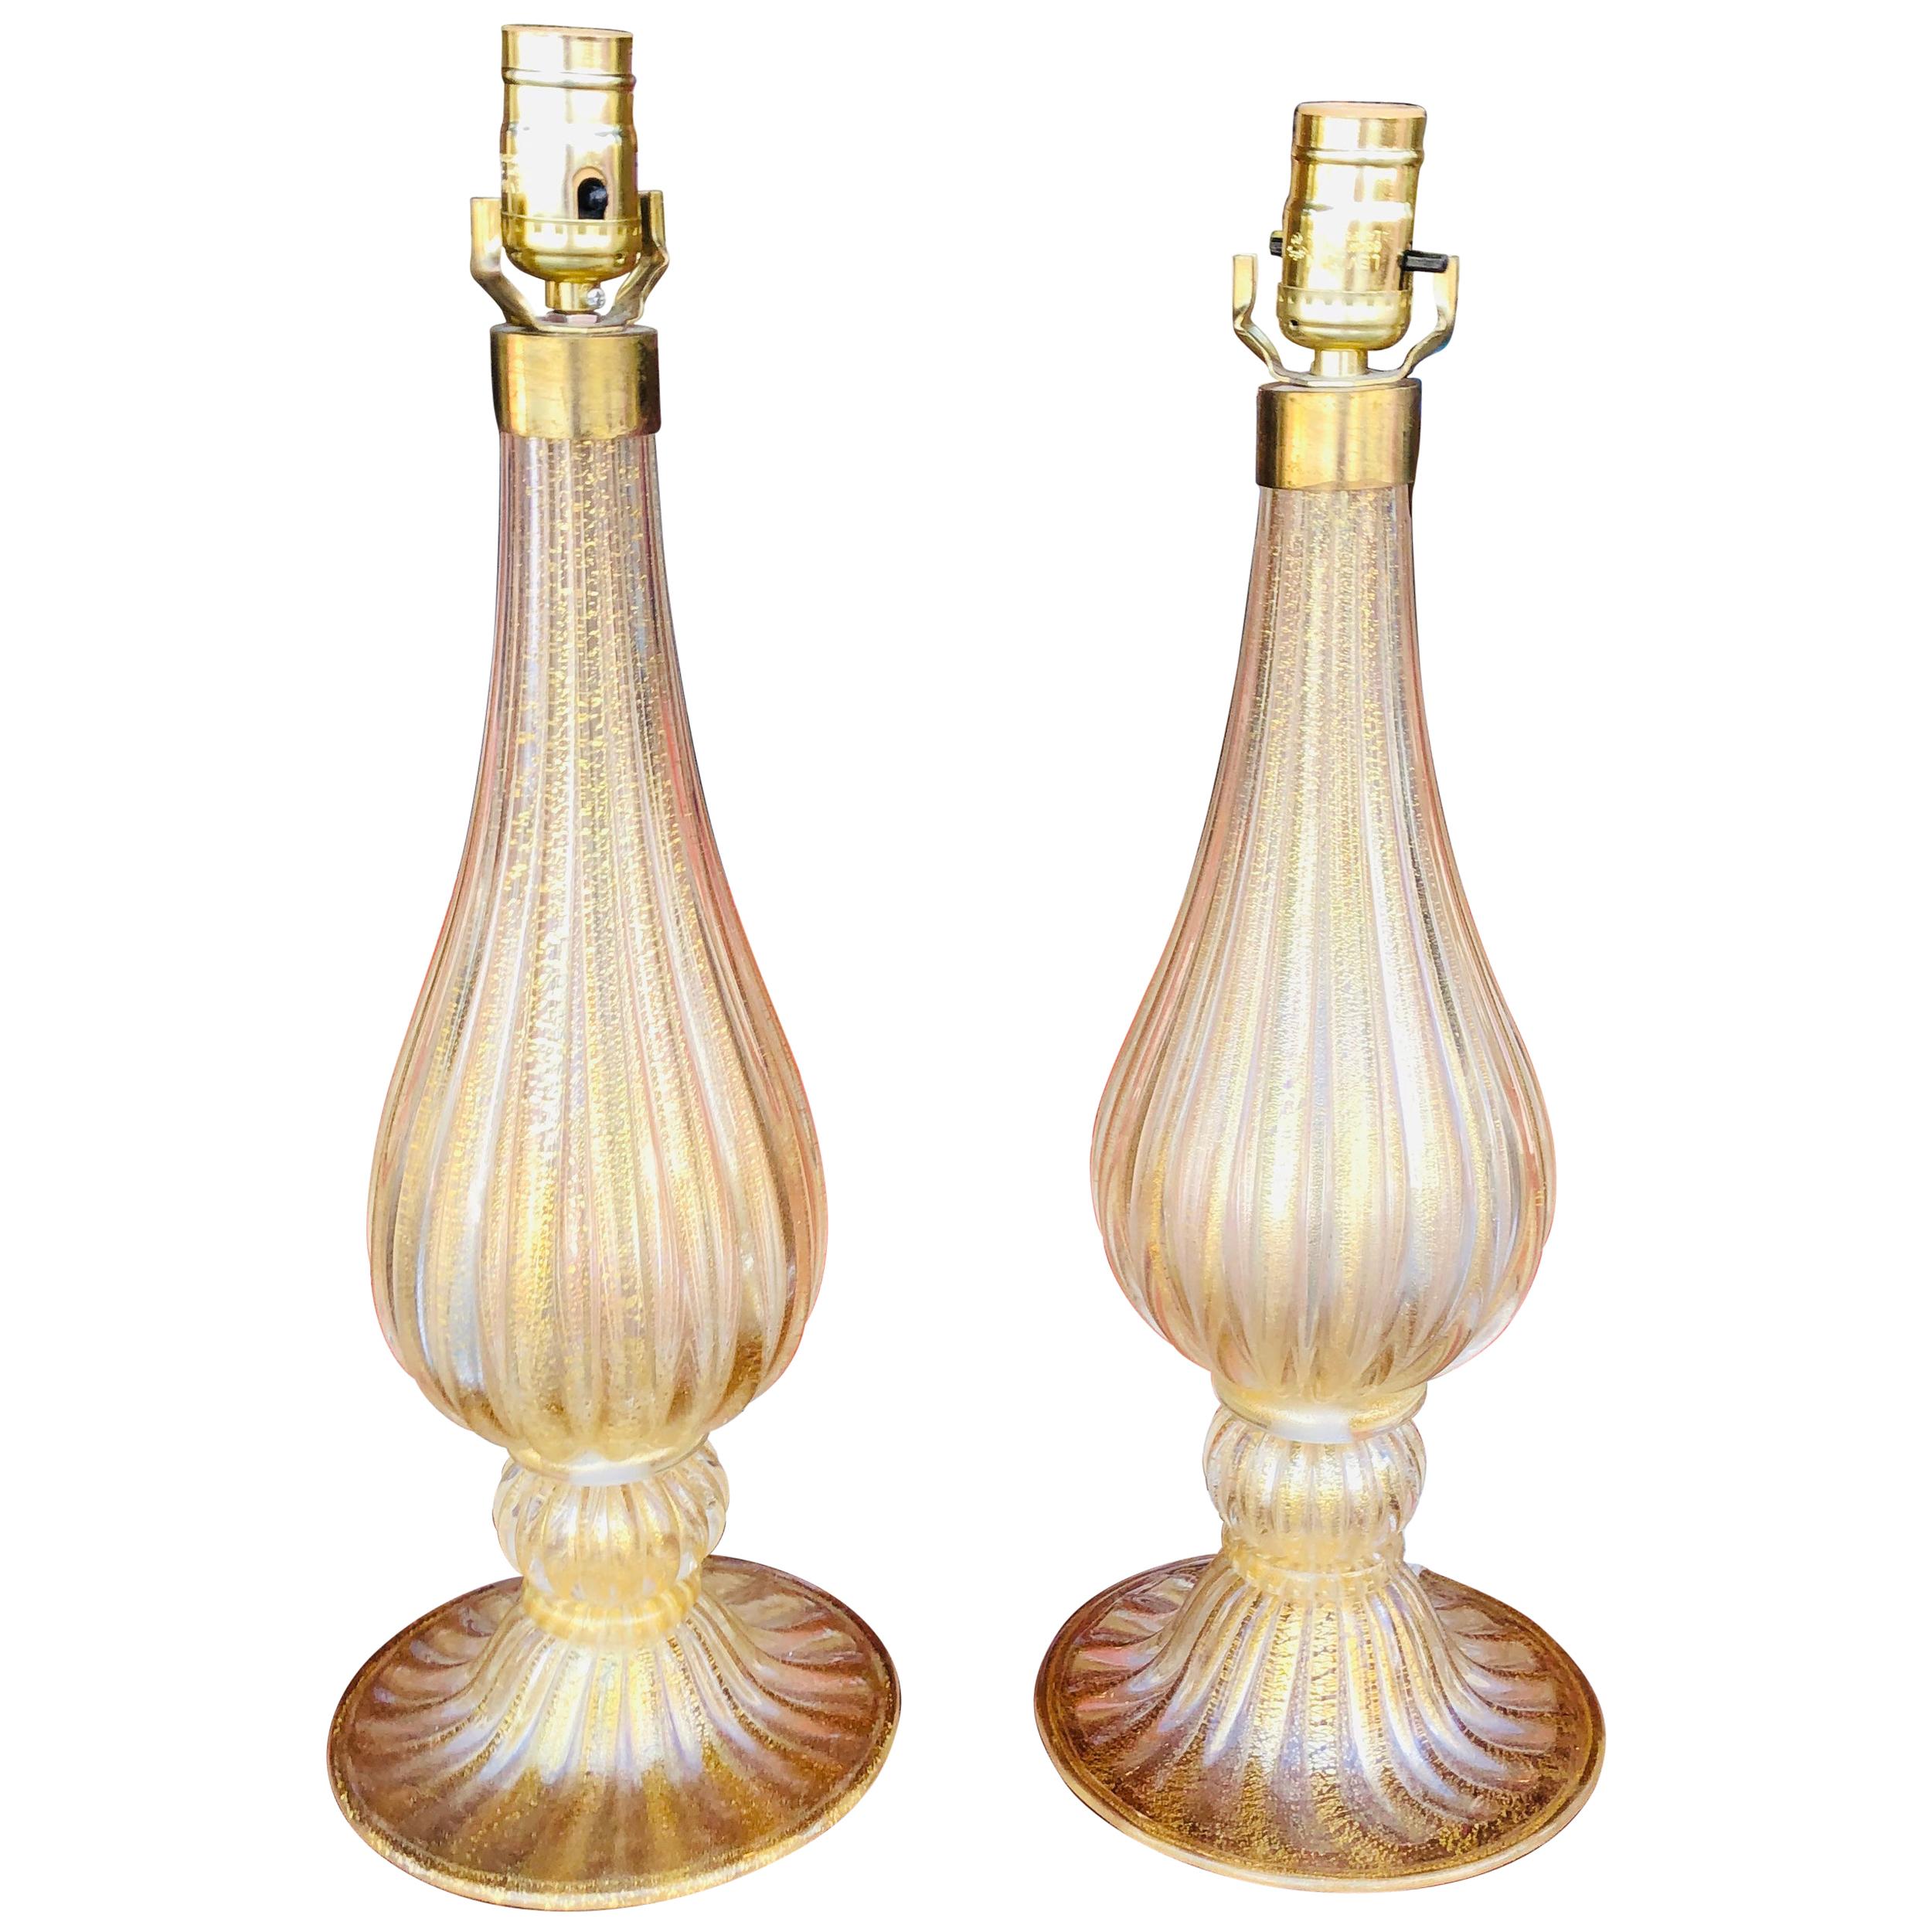 Pair of Murano Glass Style Table Lamps with Gold Accents